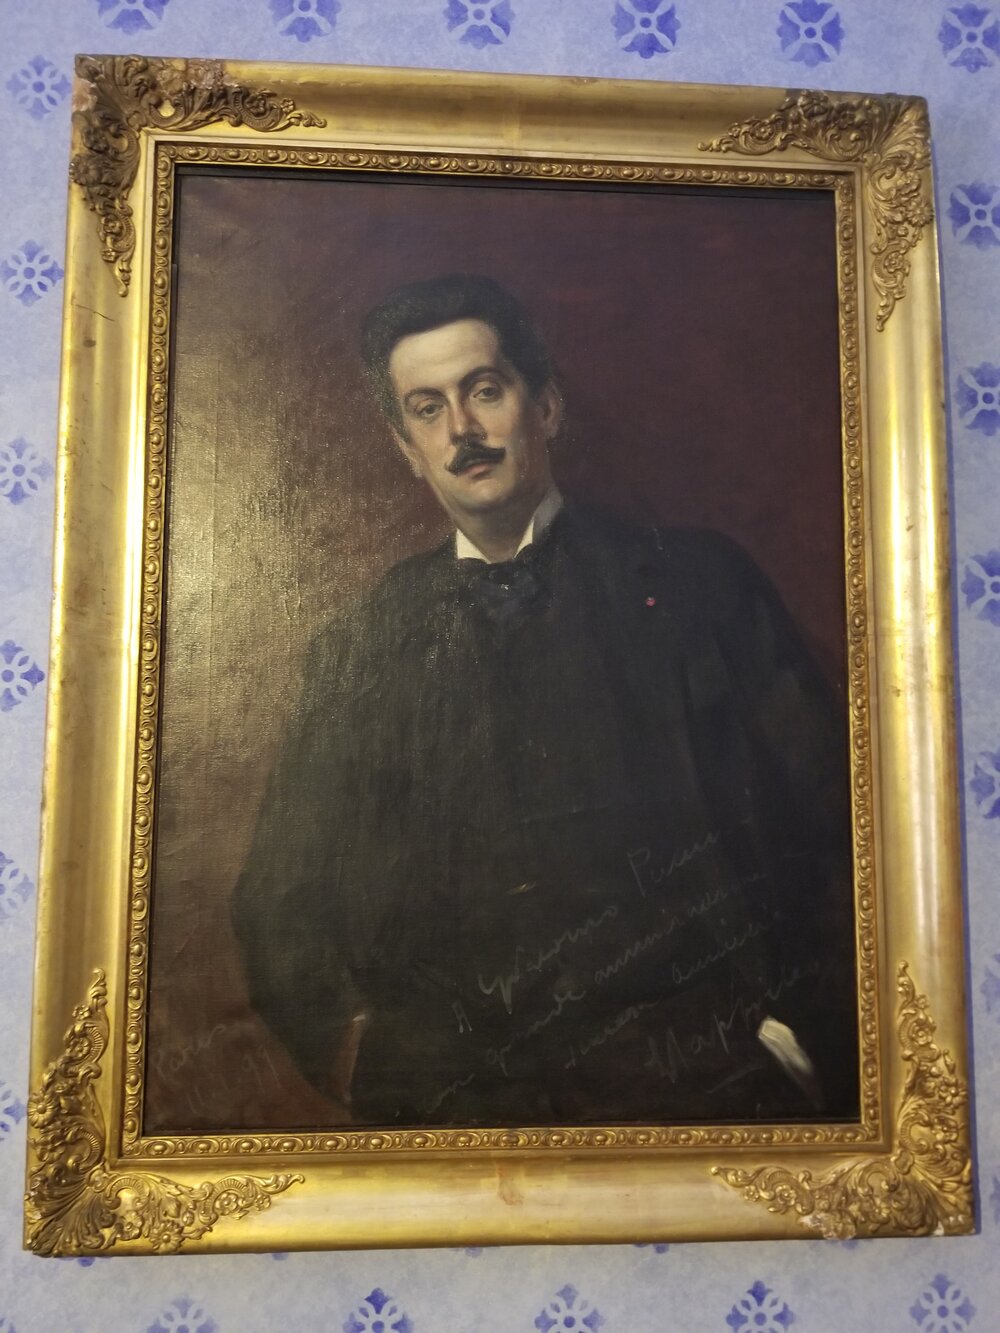 Puccini's portrait- with a little grin